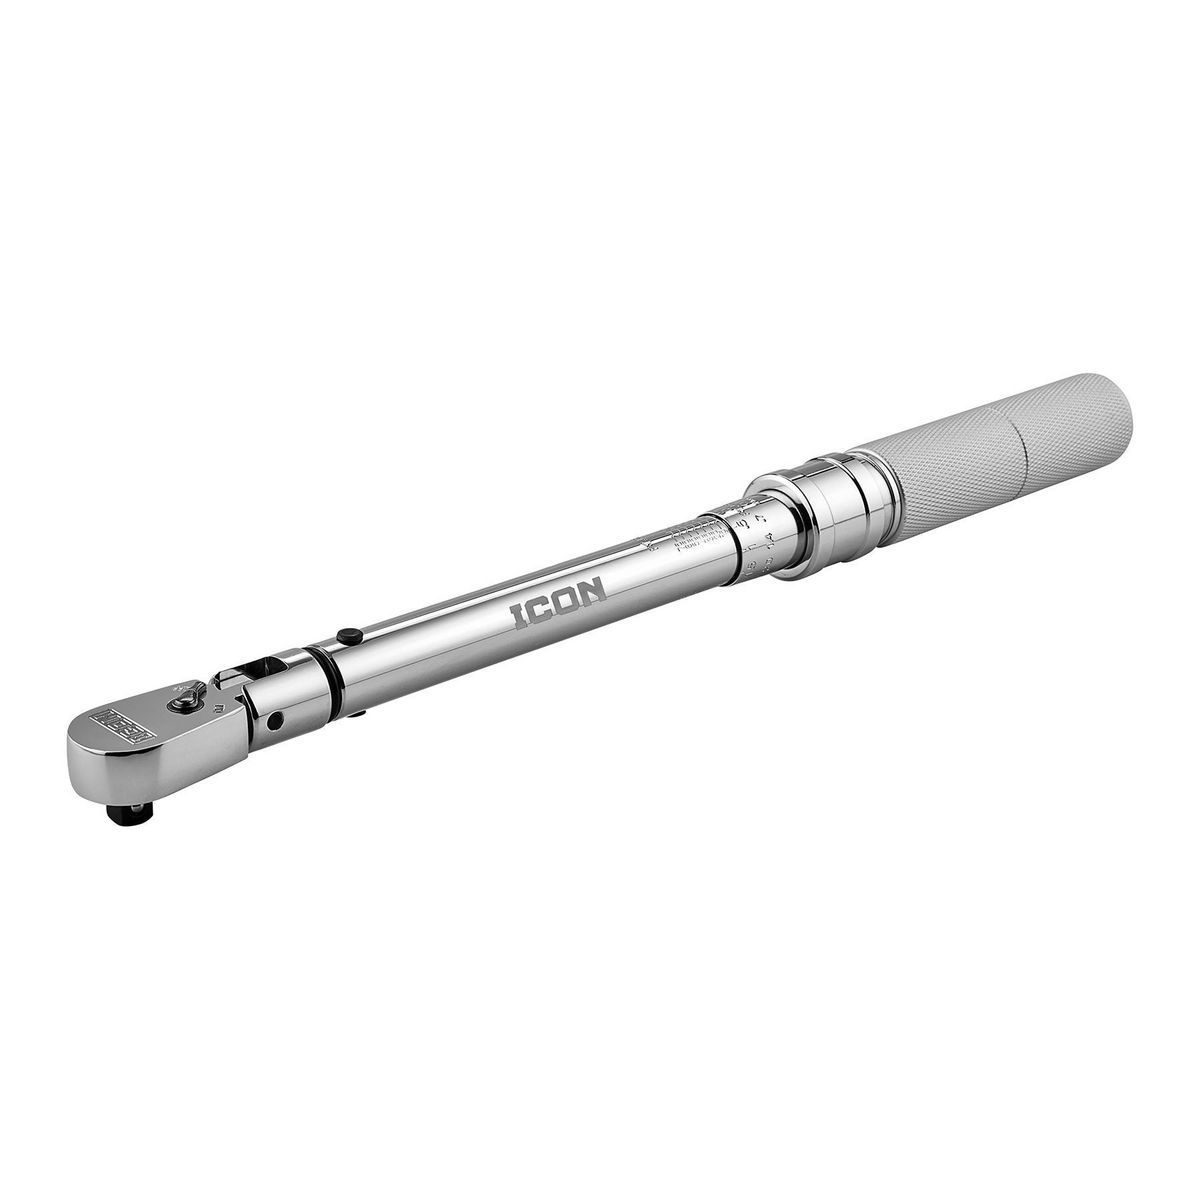 3/8 in., 5 to 75 ft. lb. Professional Flex Head Torque Wrench